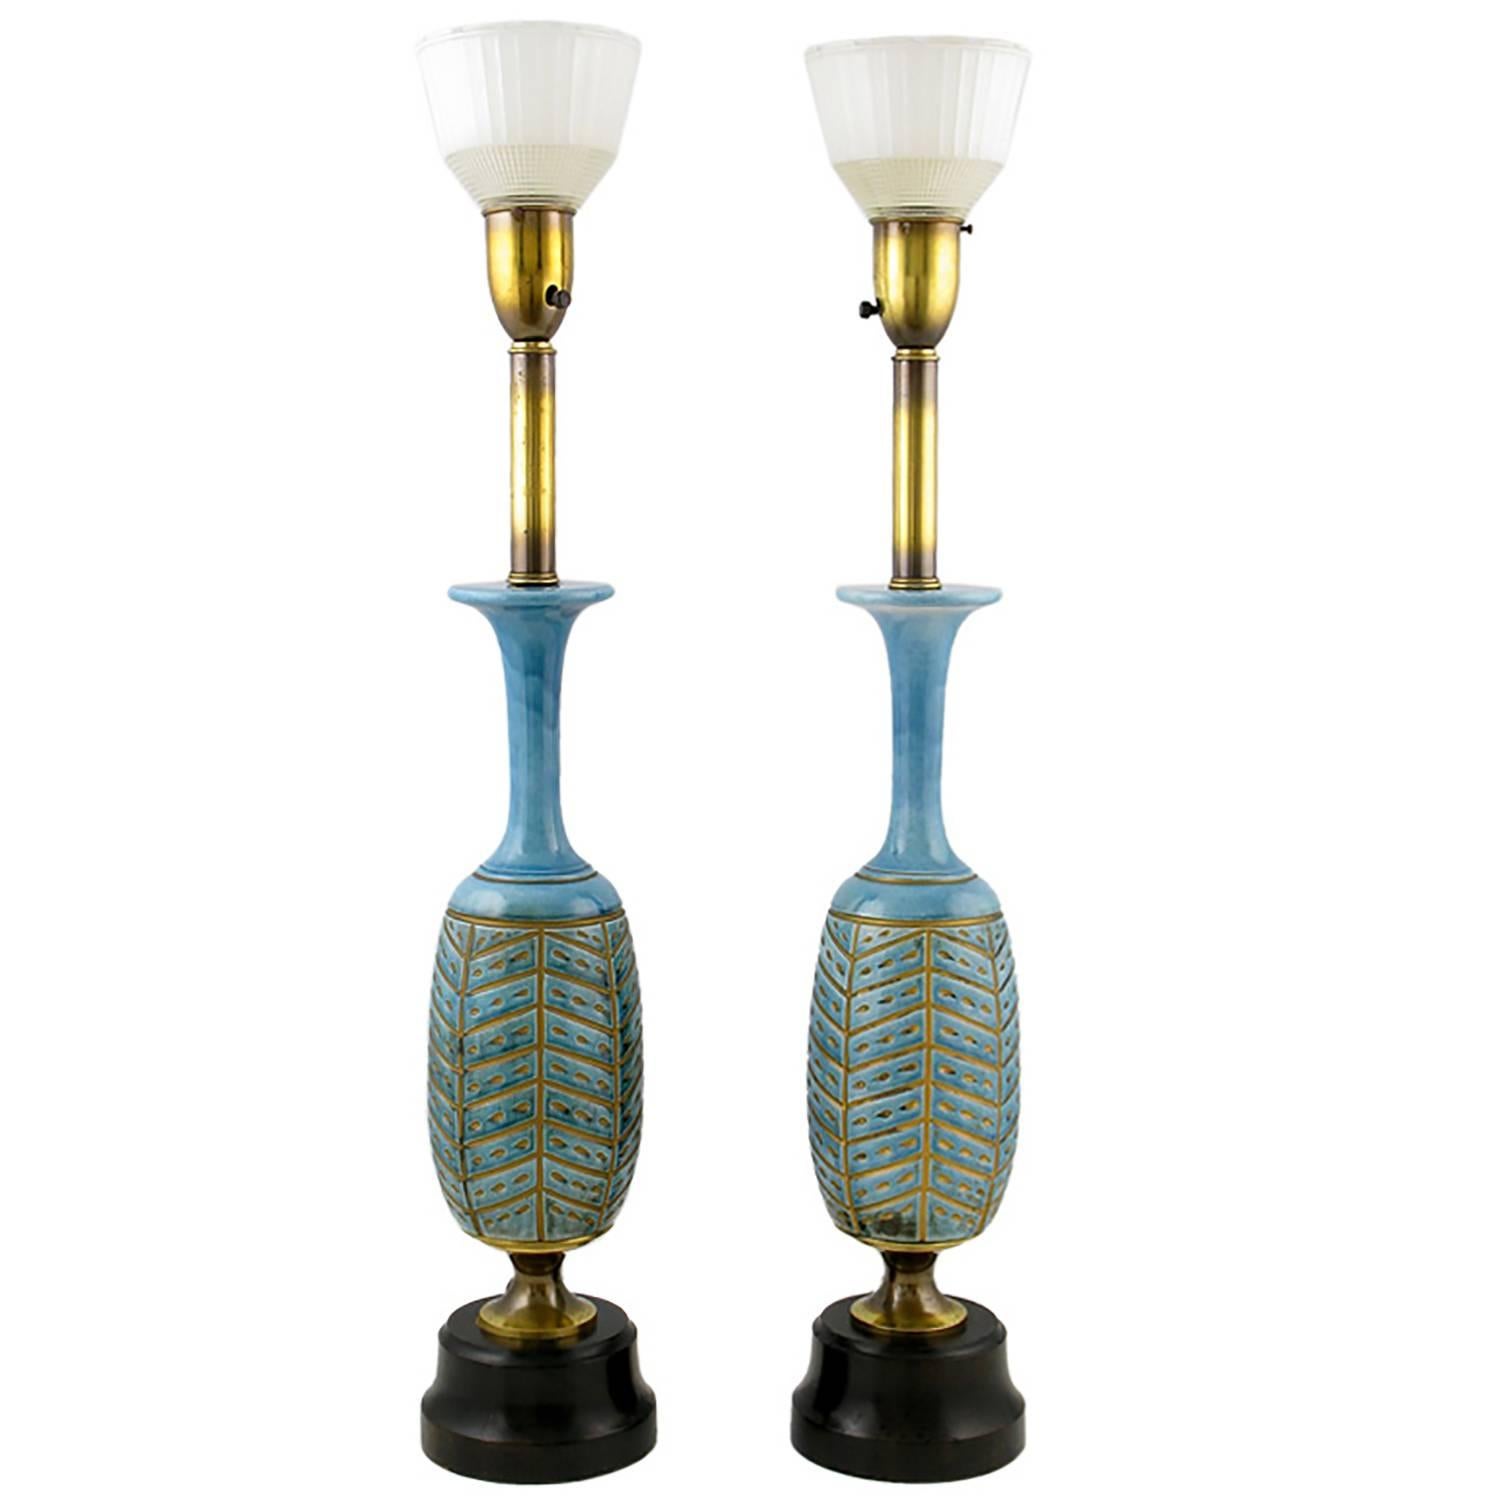 Statuesque pair of beautifully glazed baluster-form ceramic table lamps with impressed and gilt herringbone design. Ebonized wood base and original clear and milk glass diffusers. Attributed to Rembrandt Lamps, due to the style of diffuser and brass